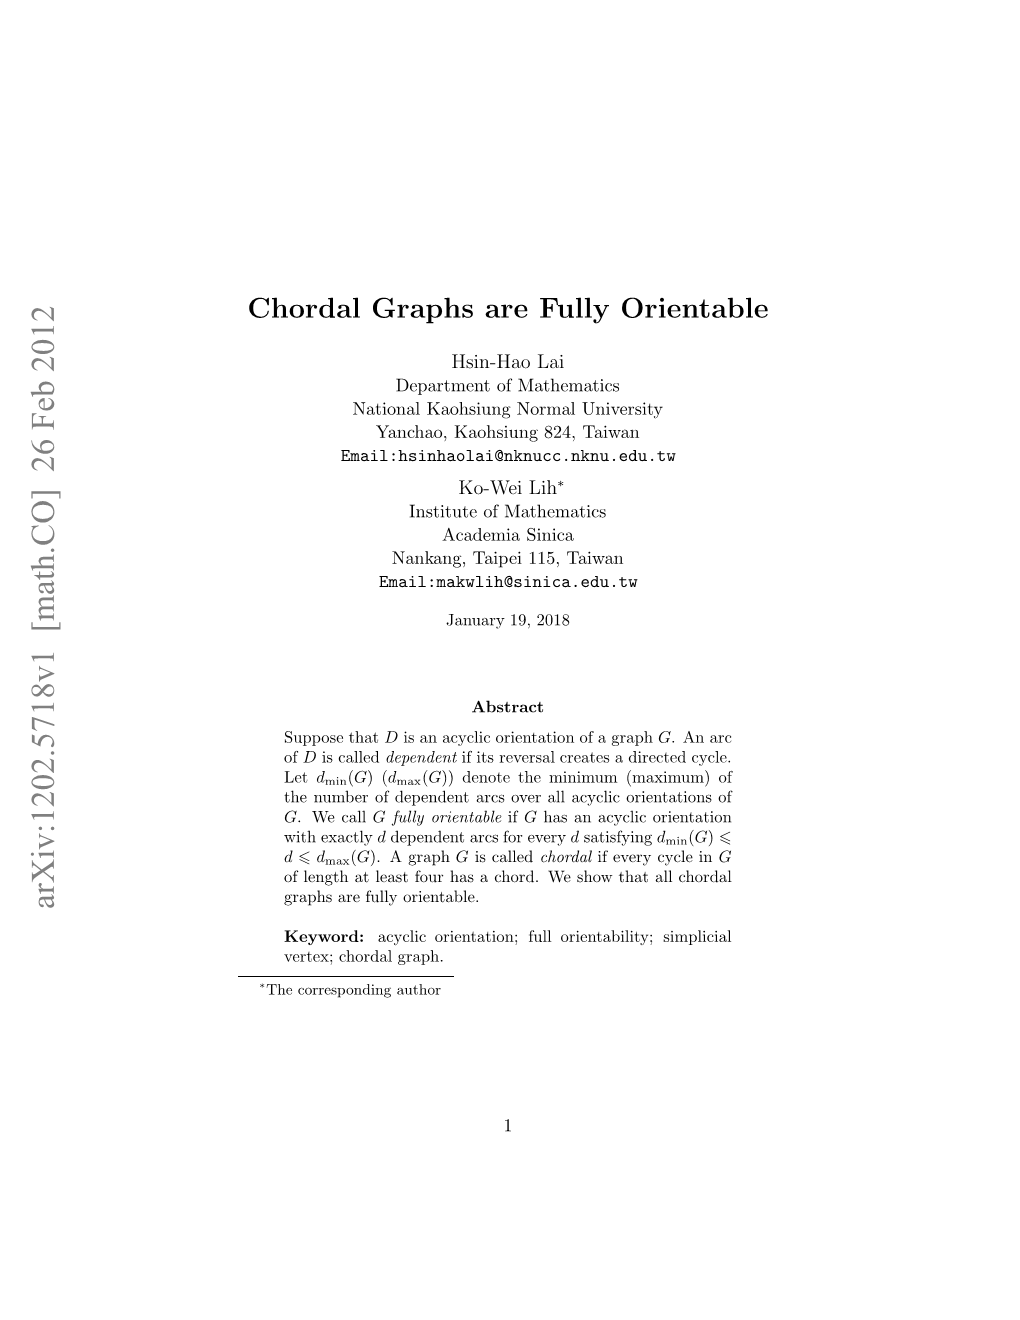 Chordal Graphs Are Fully Orientable